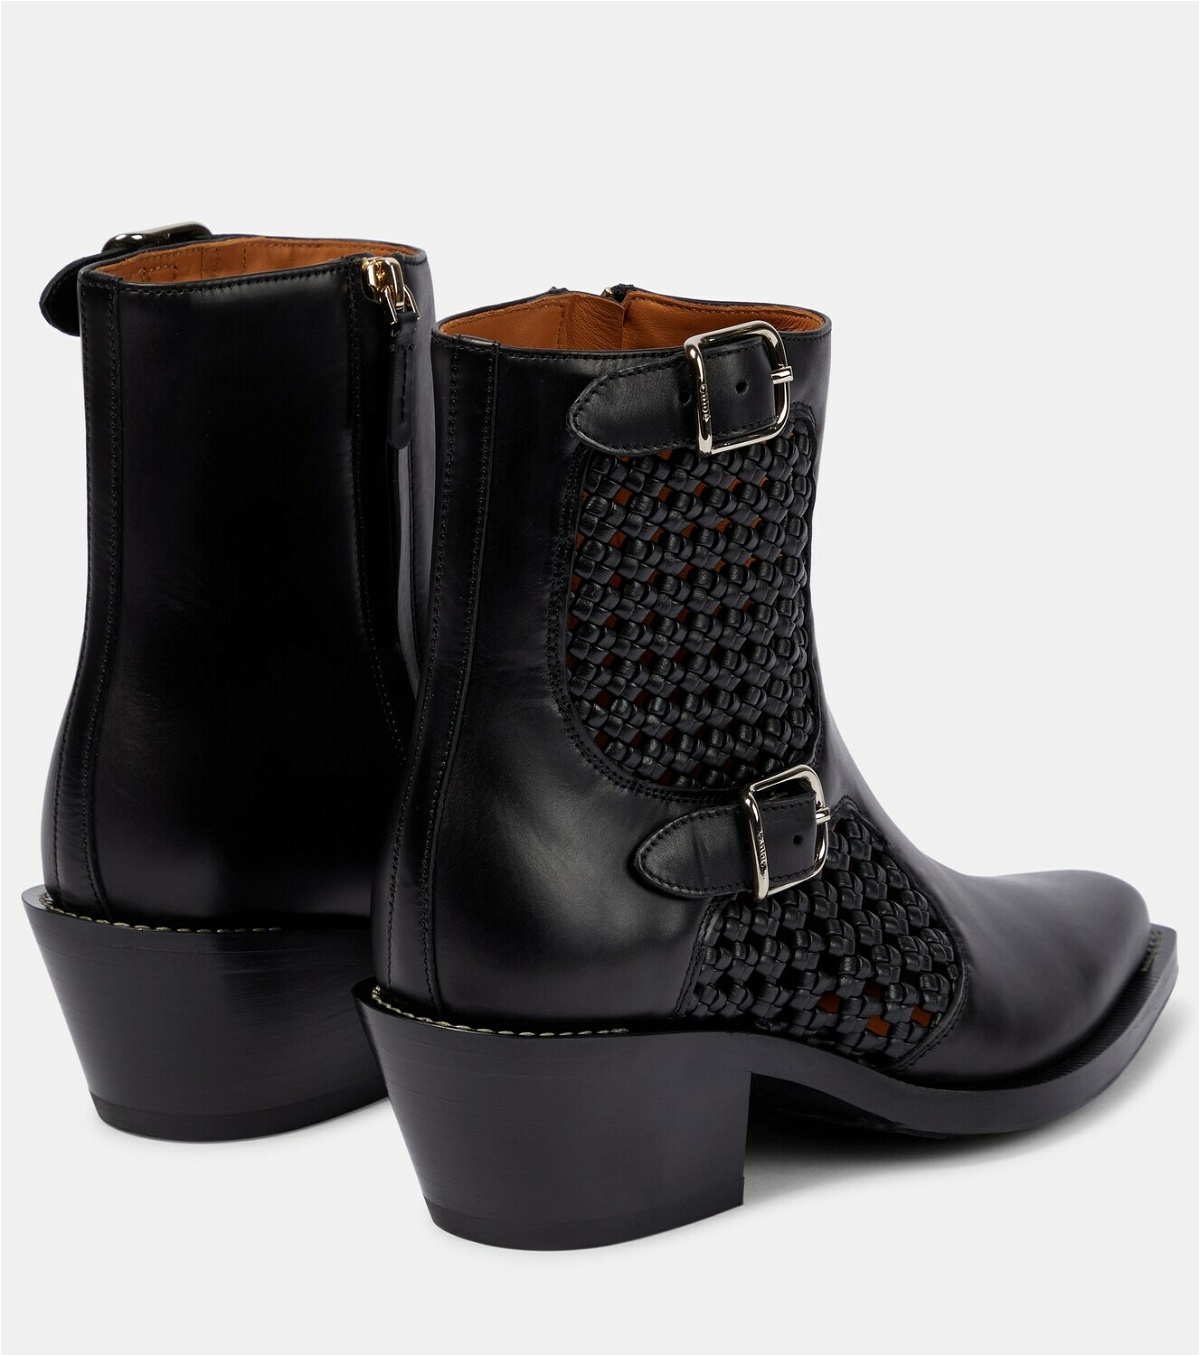 Chloe - Nellie leather ankle boots Chloe